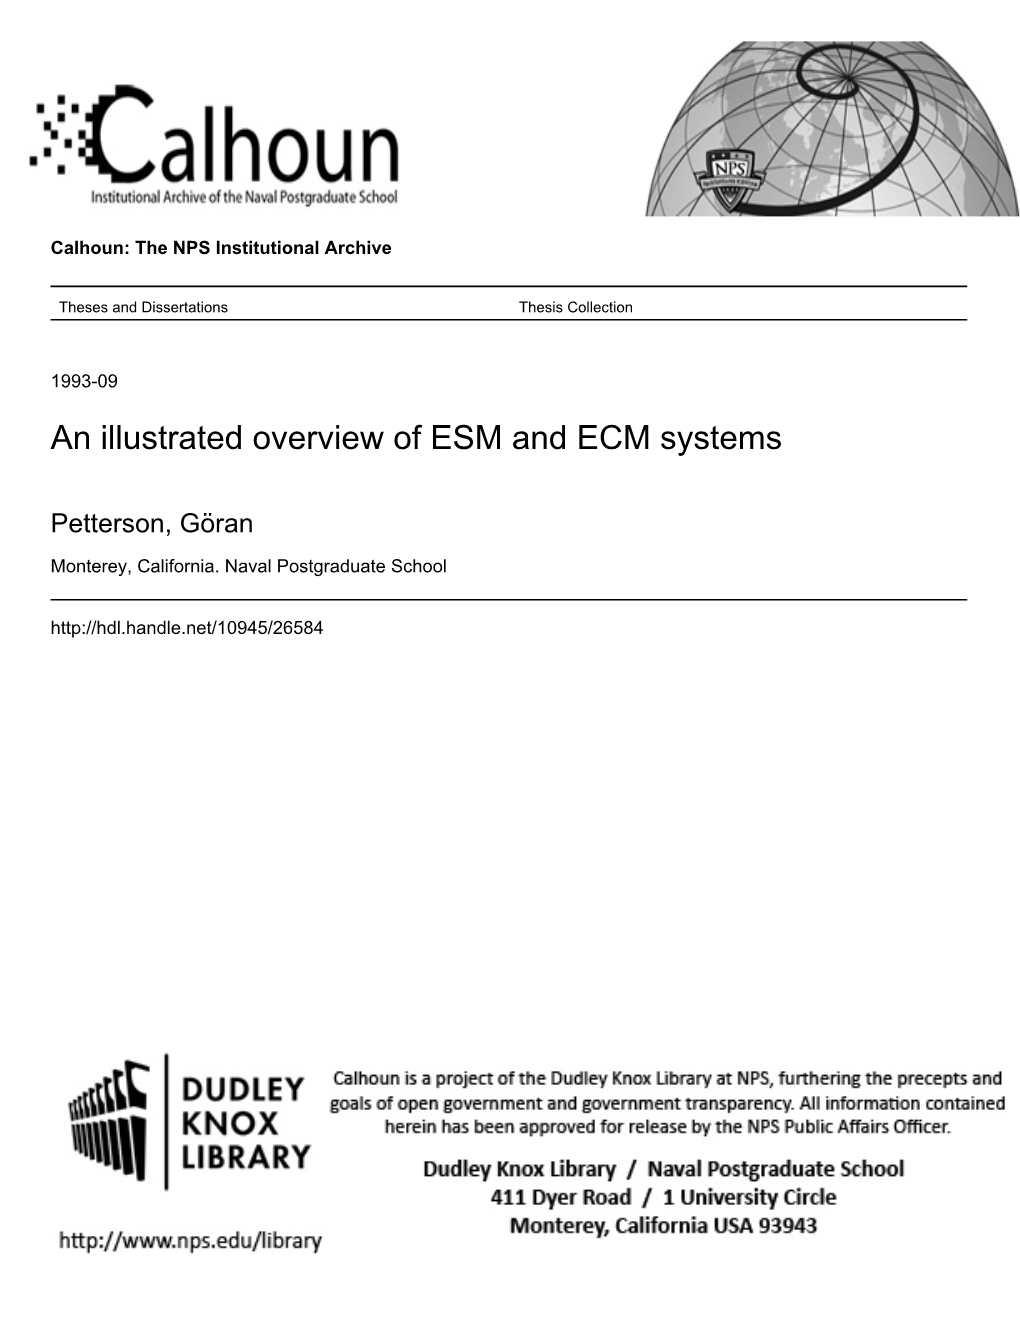 An Illustrated Overview of ESM and ECM Systems